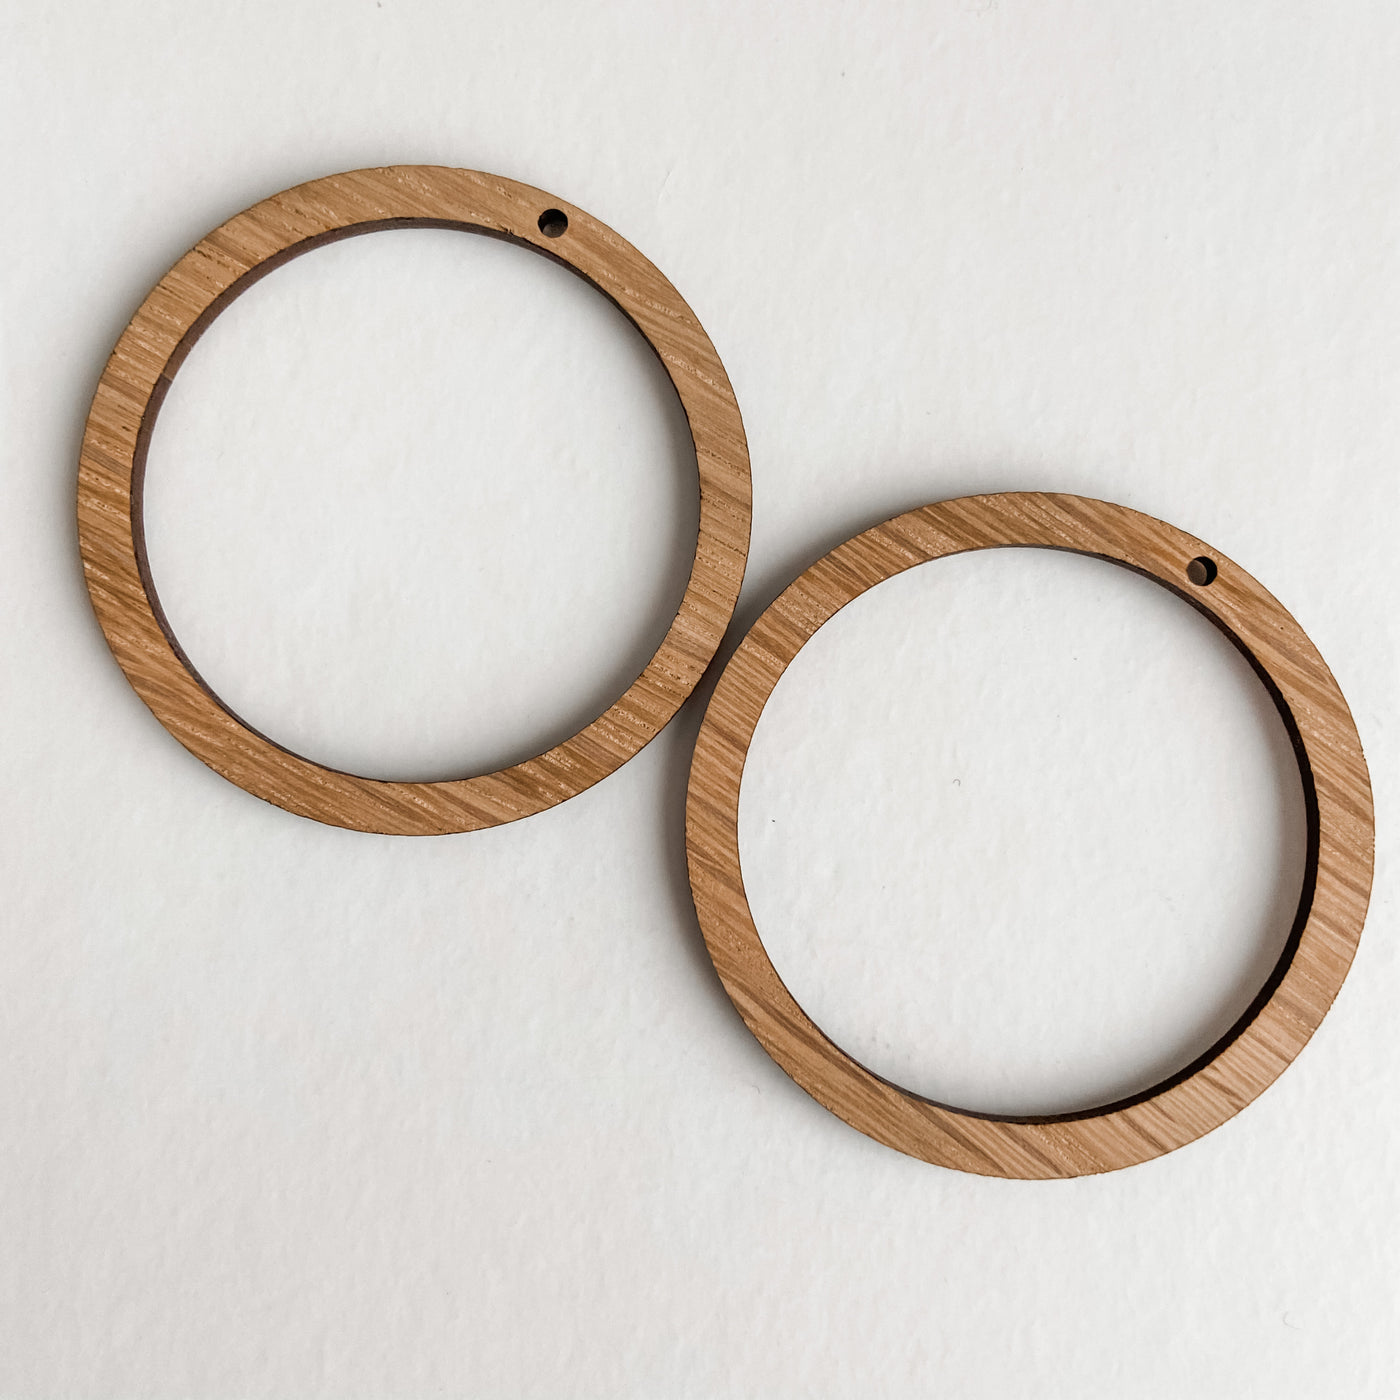 Accessories - Bamboo Earrings Large Circles